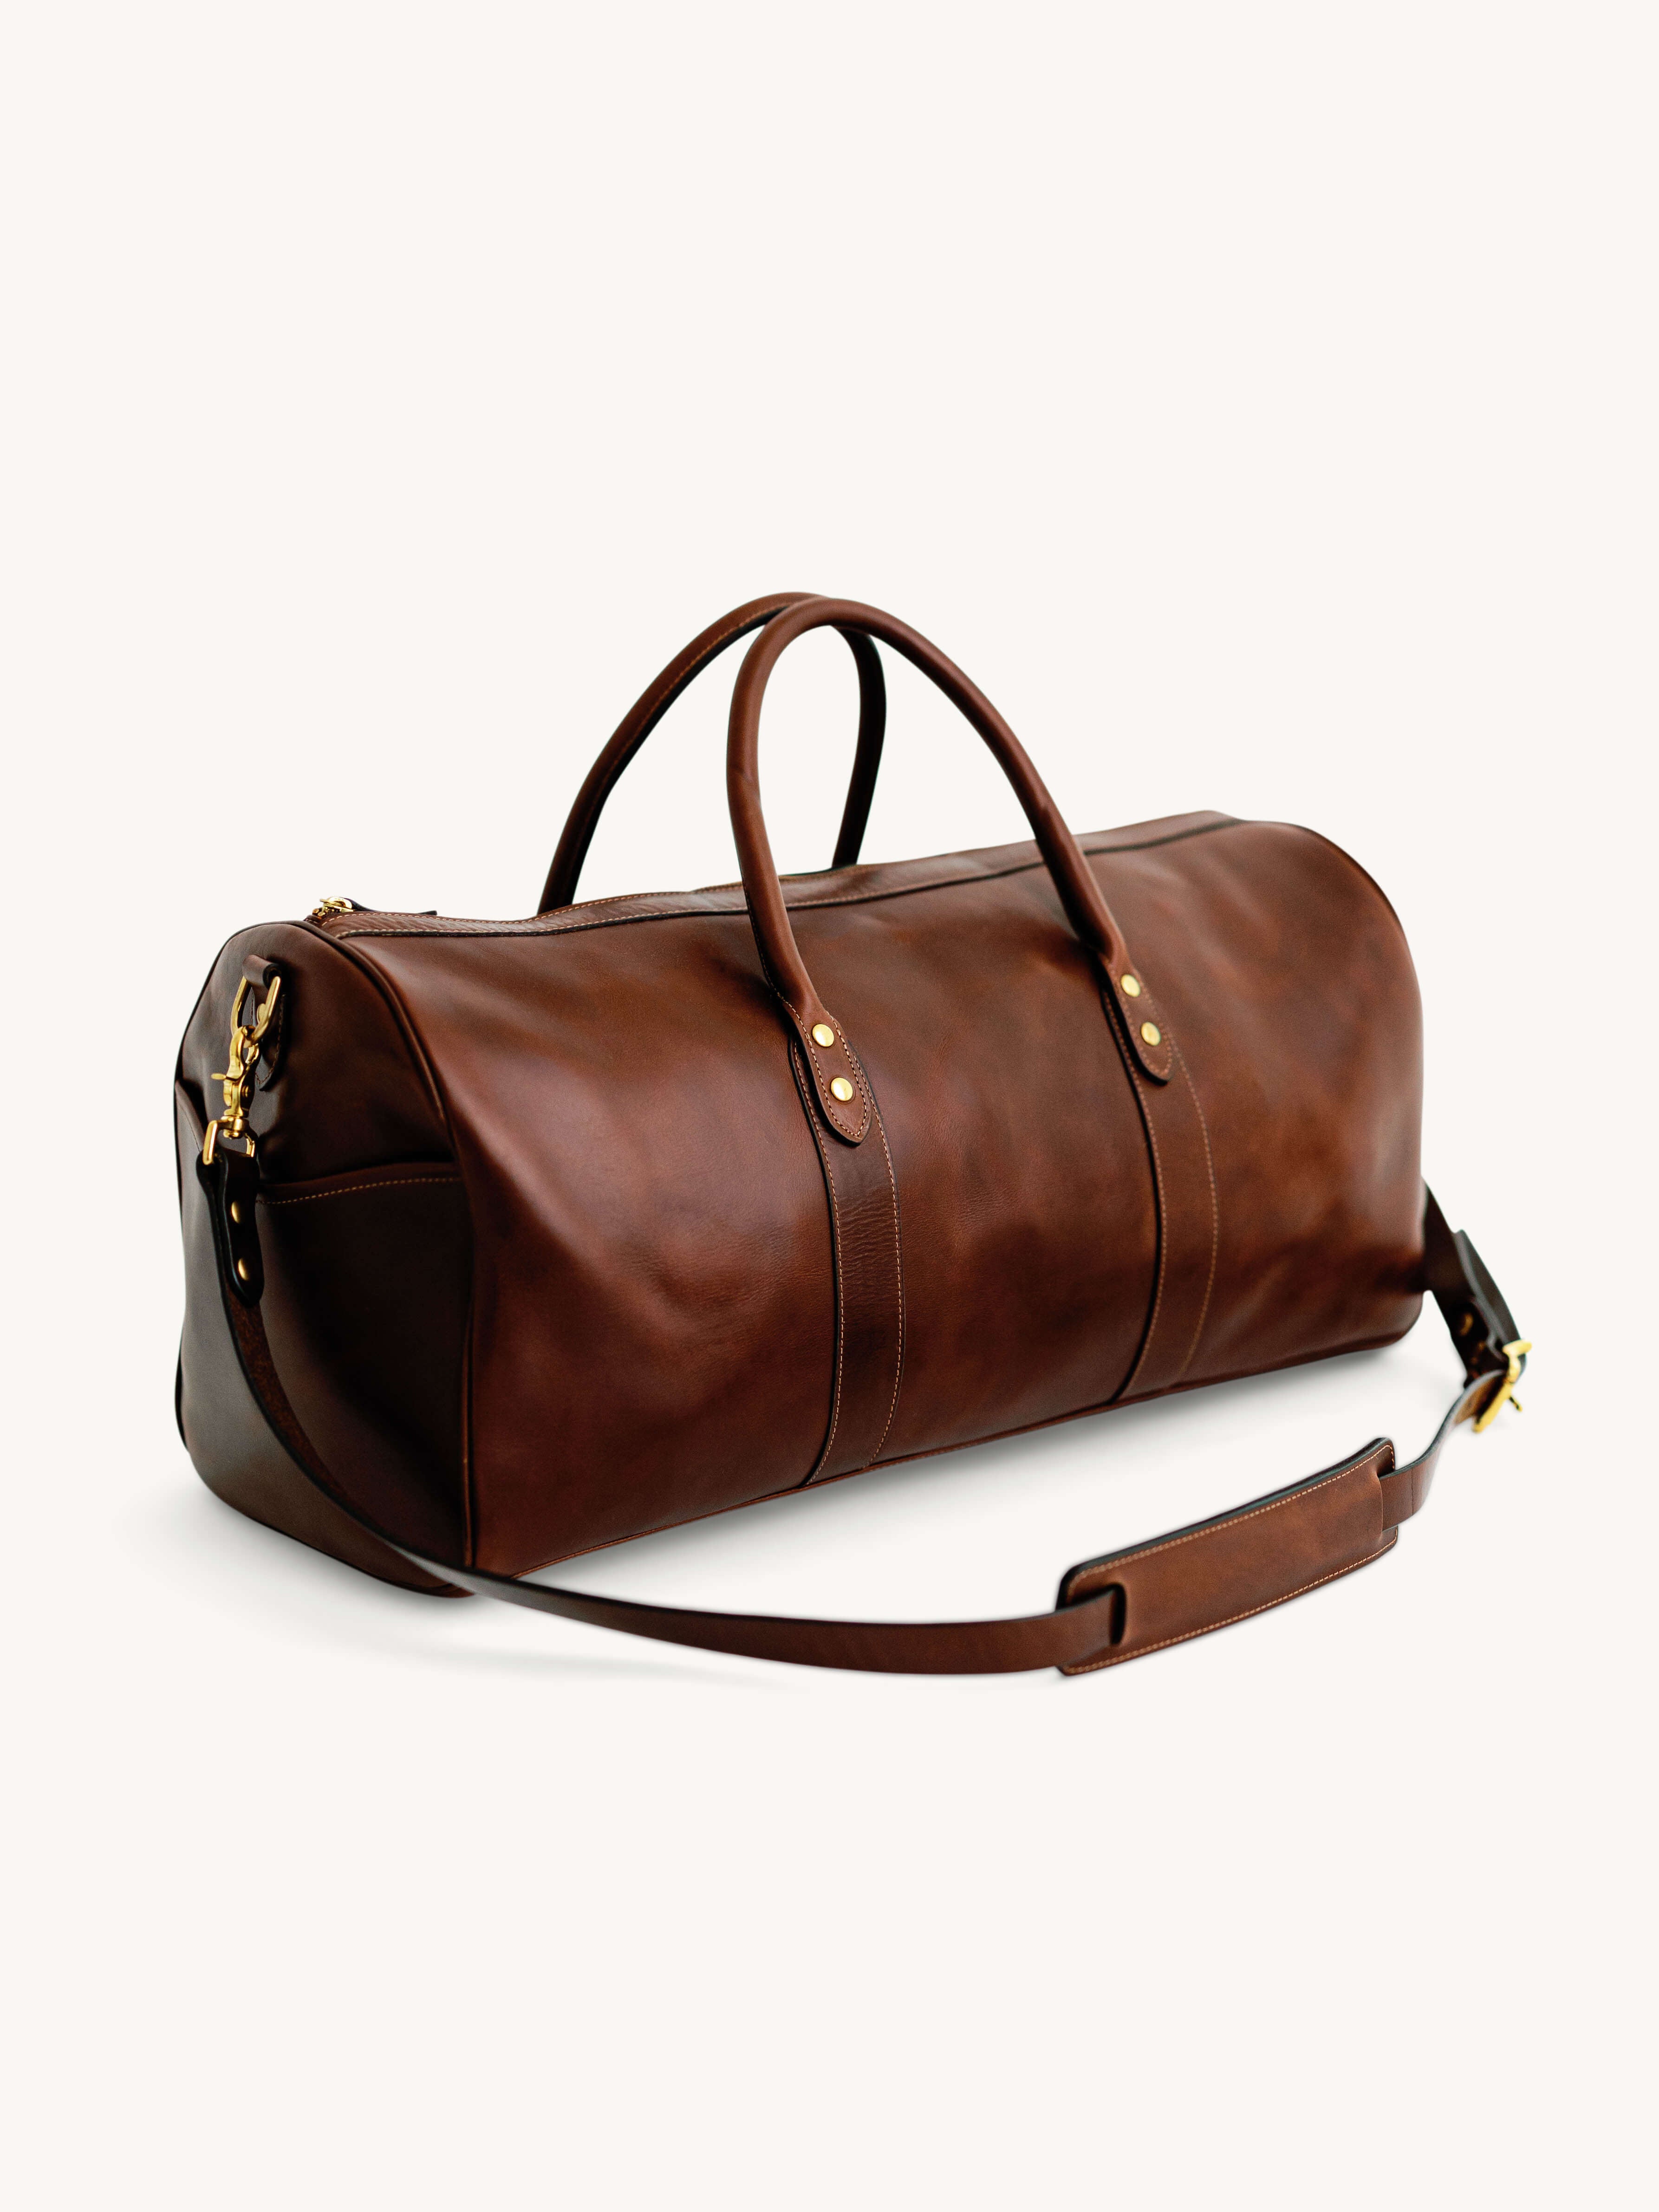 Handmade Substantial Leather Duffle Bag · Brown by Capra - Capra Leather